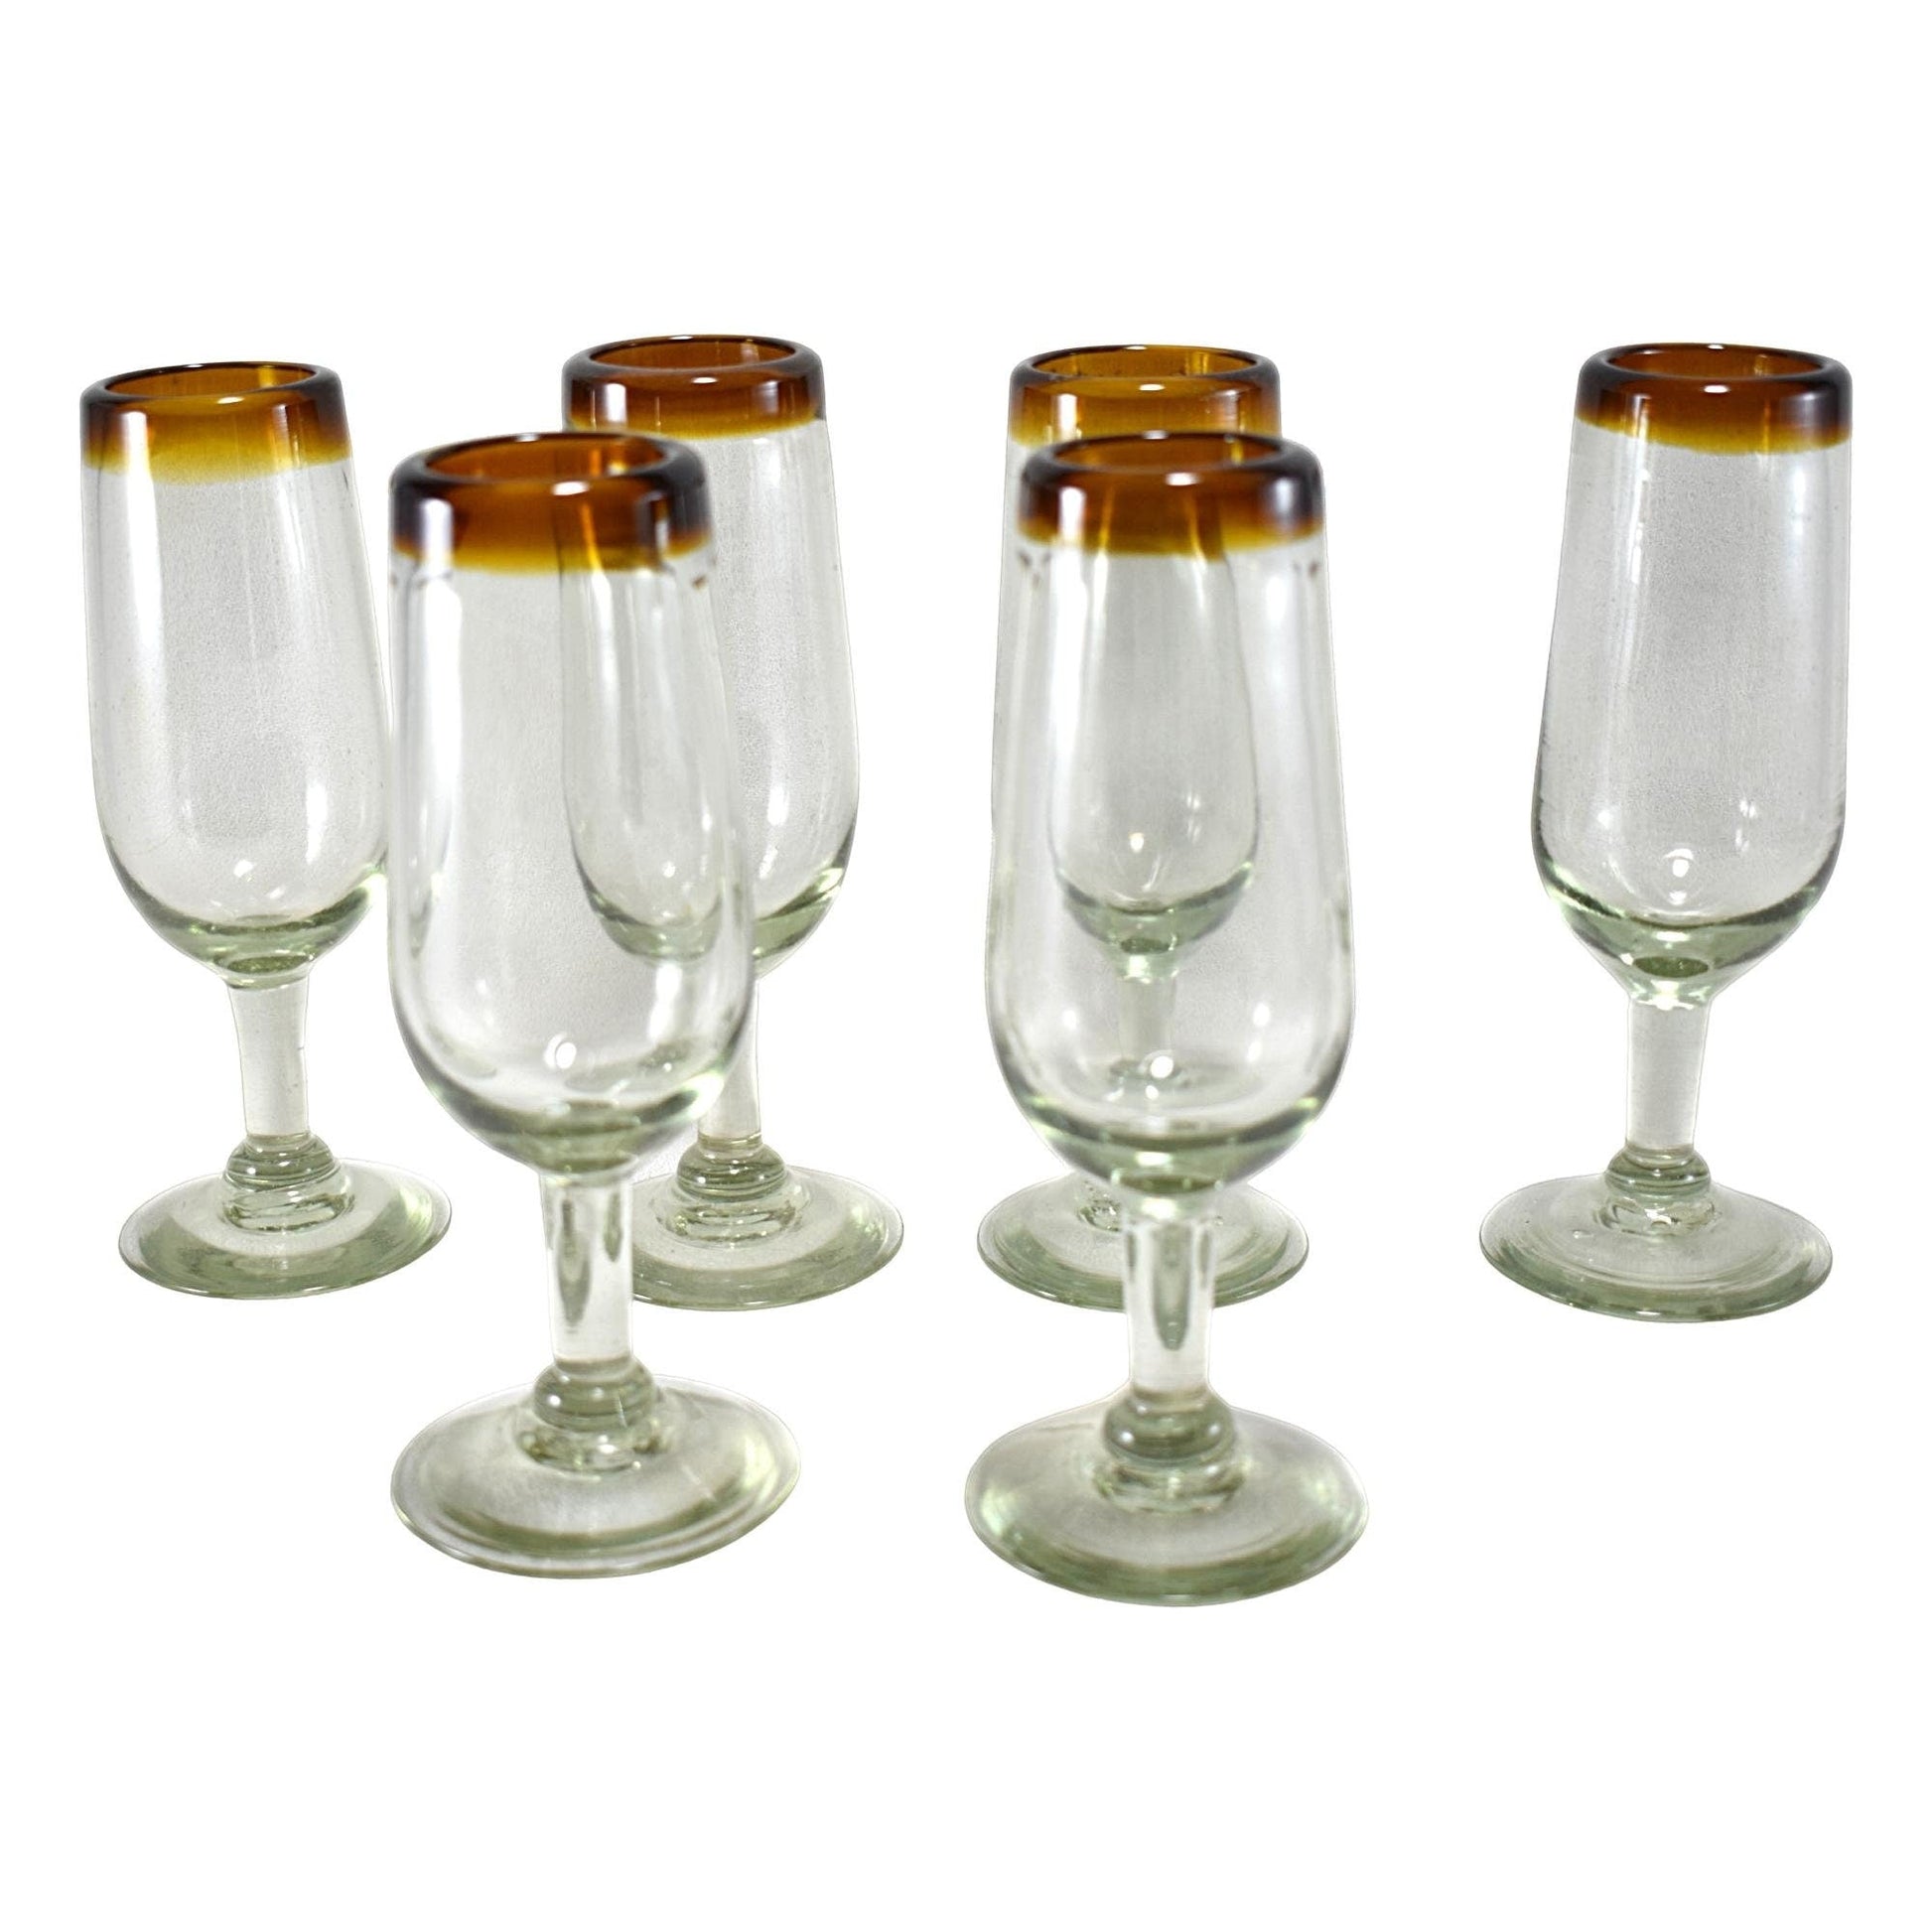 MAREY Champagne Glasses Mexican Blown Glass Artisan Crafted Set of 6 Pieces  100% Recycled Glass large Glass, Red Rim 